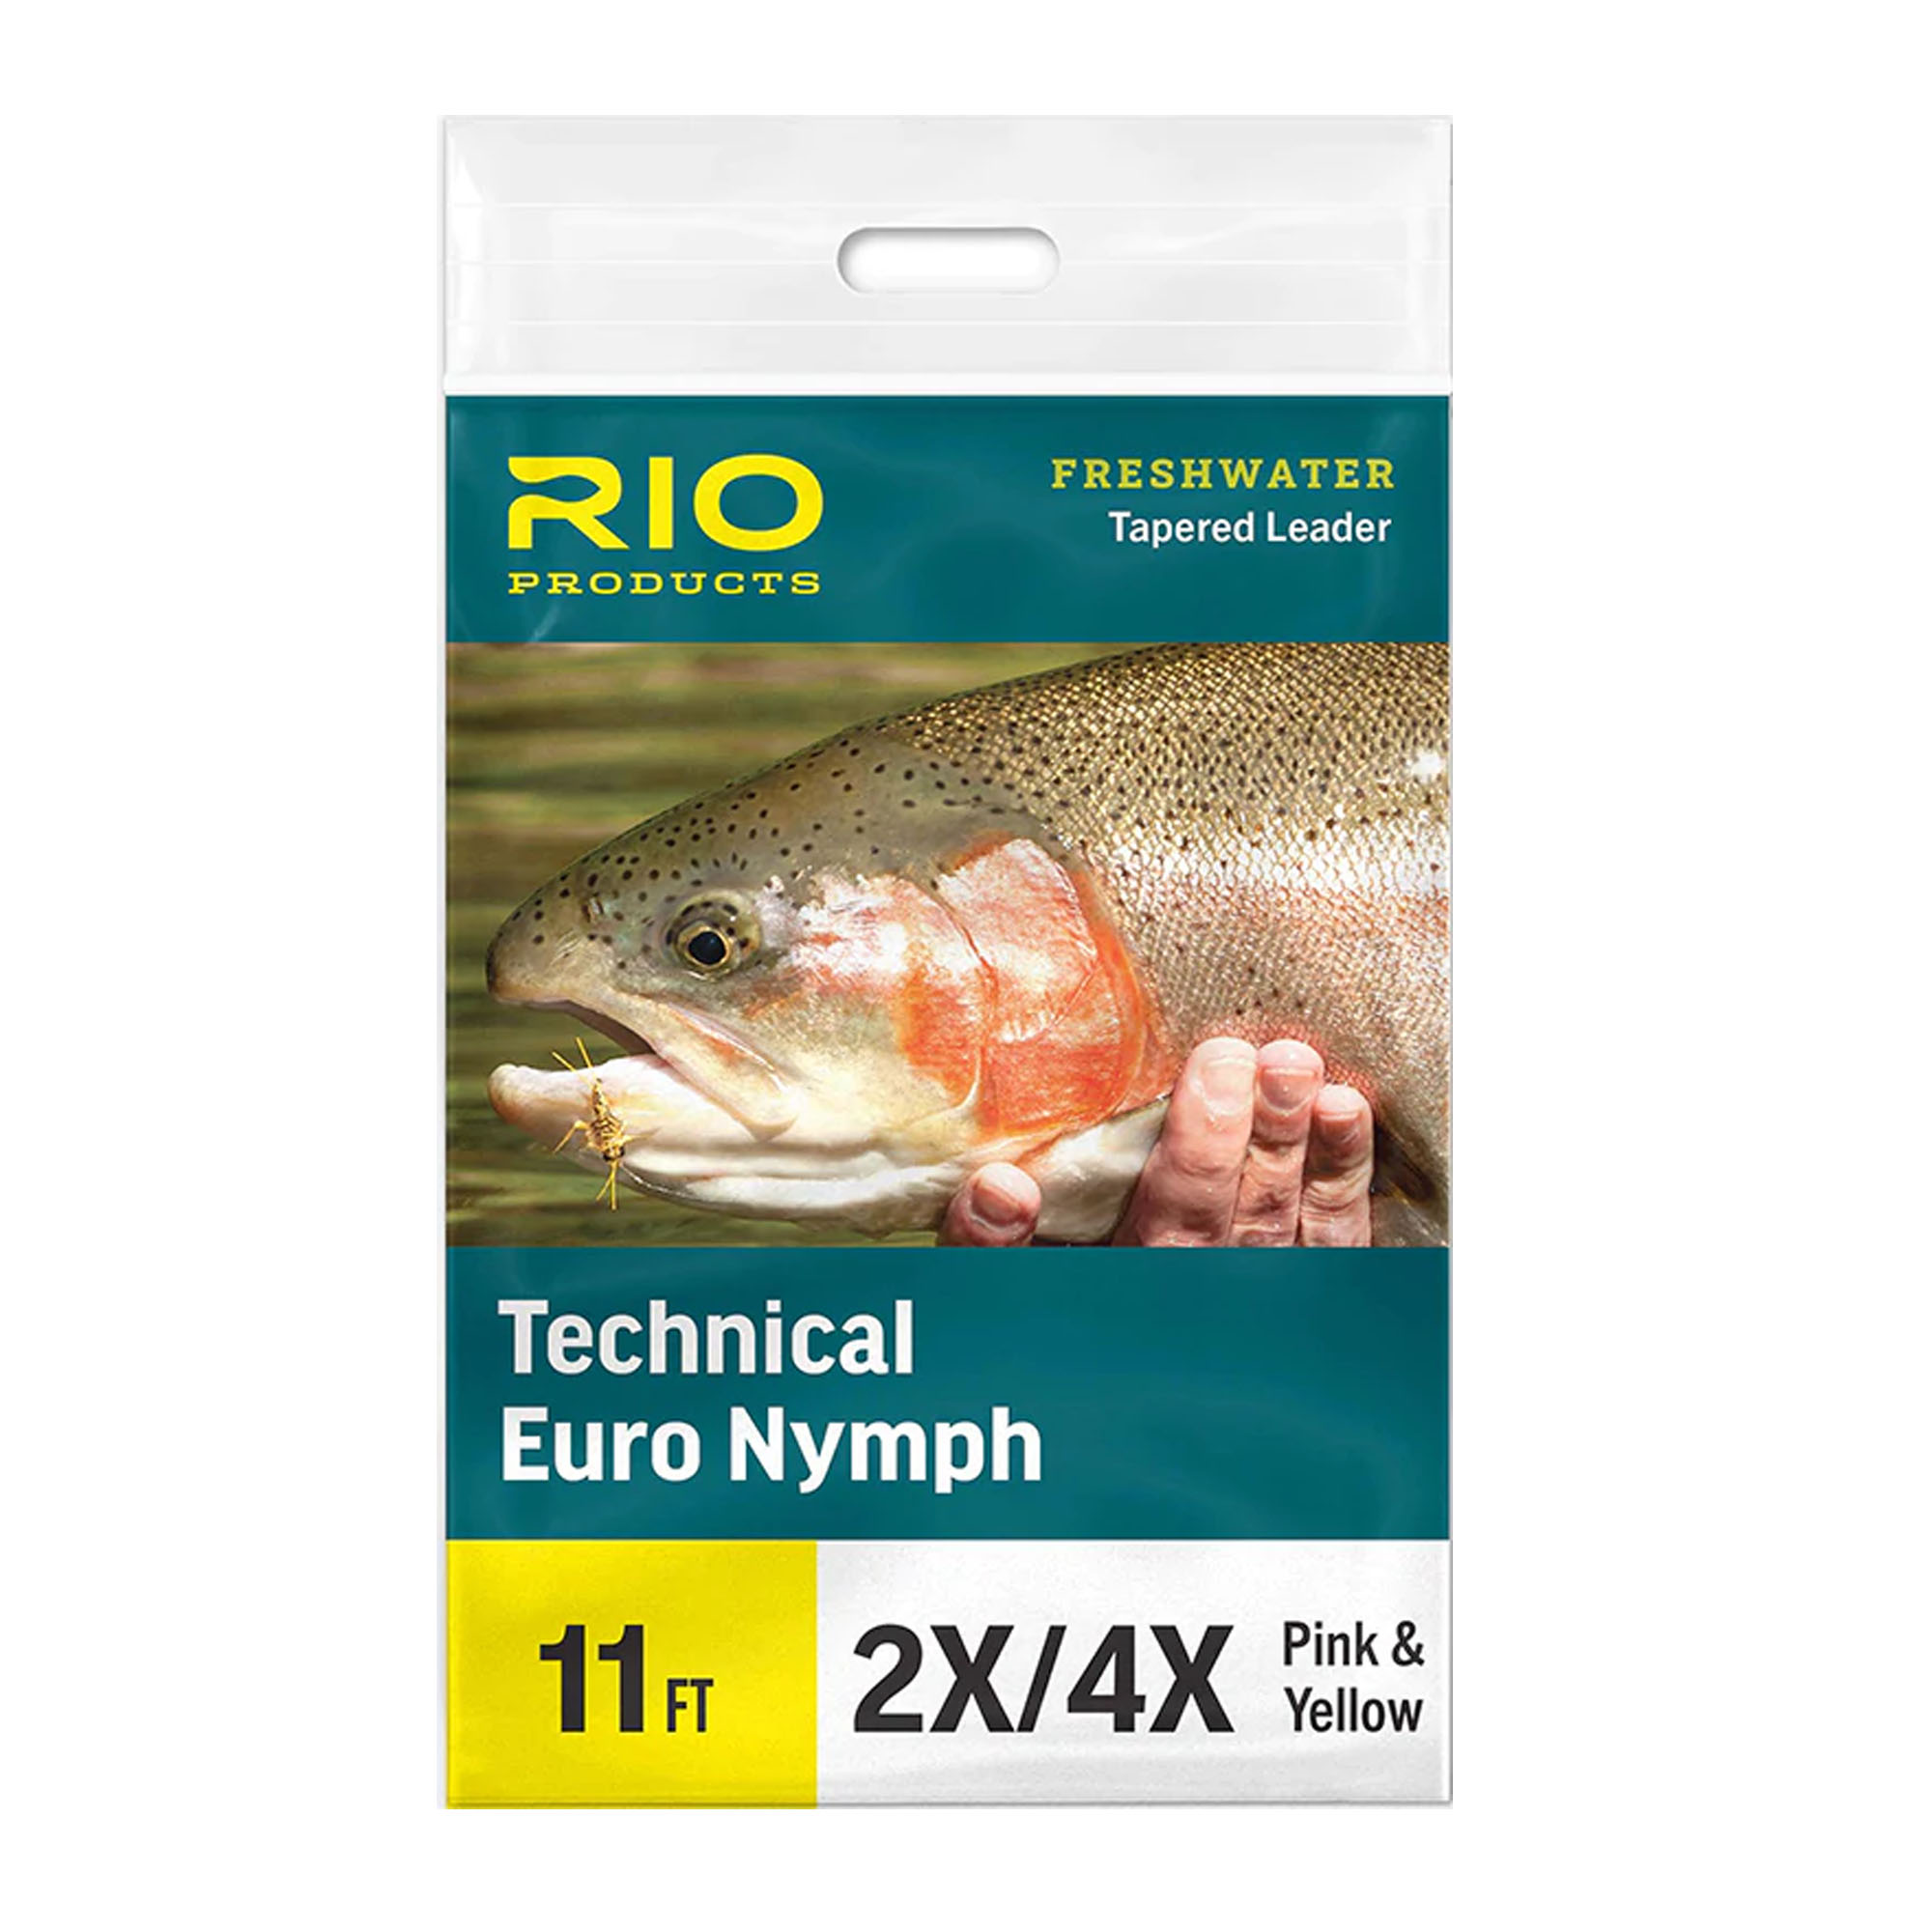 RIO Technical Euro Nymph Leader – Guide Flyfishing